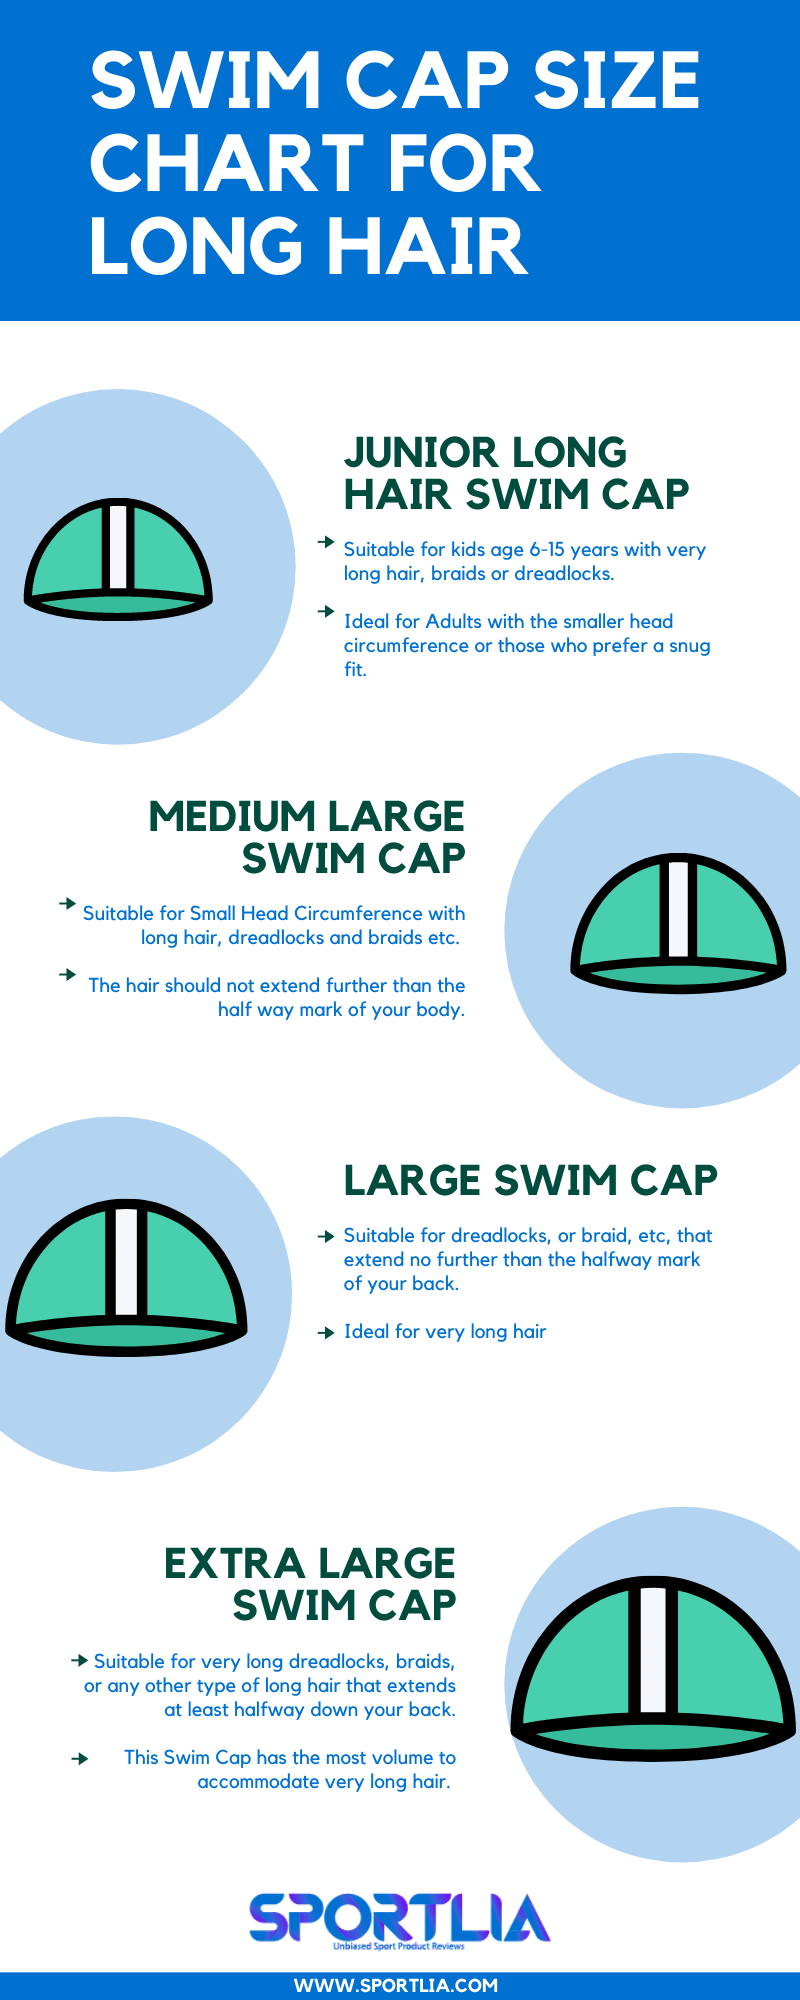 Swim Cap Size Chart for Long Hair Infographic